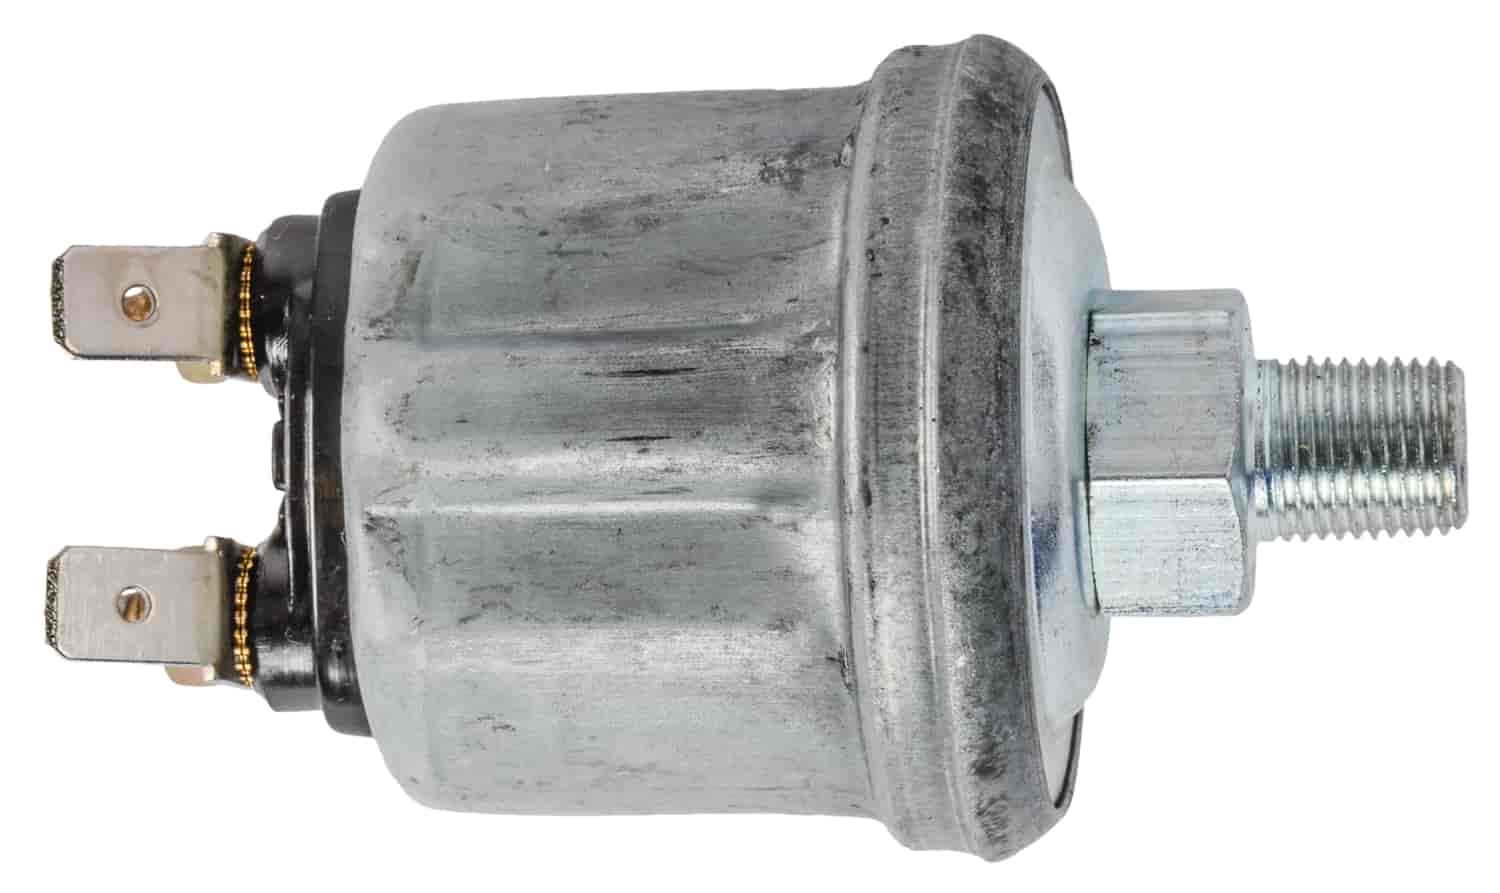 Replacement Boost Pressure Sending Unit for JEGS LED Boost Gauges